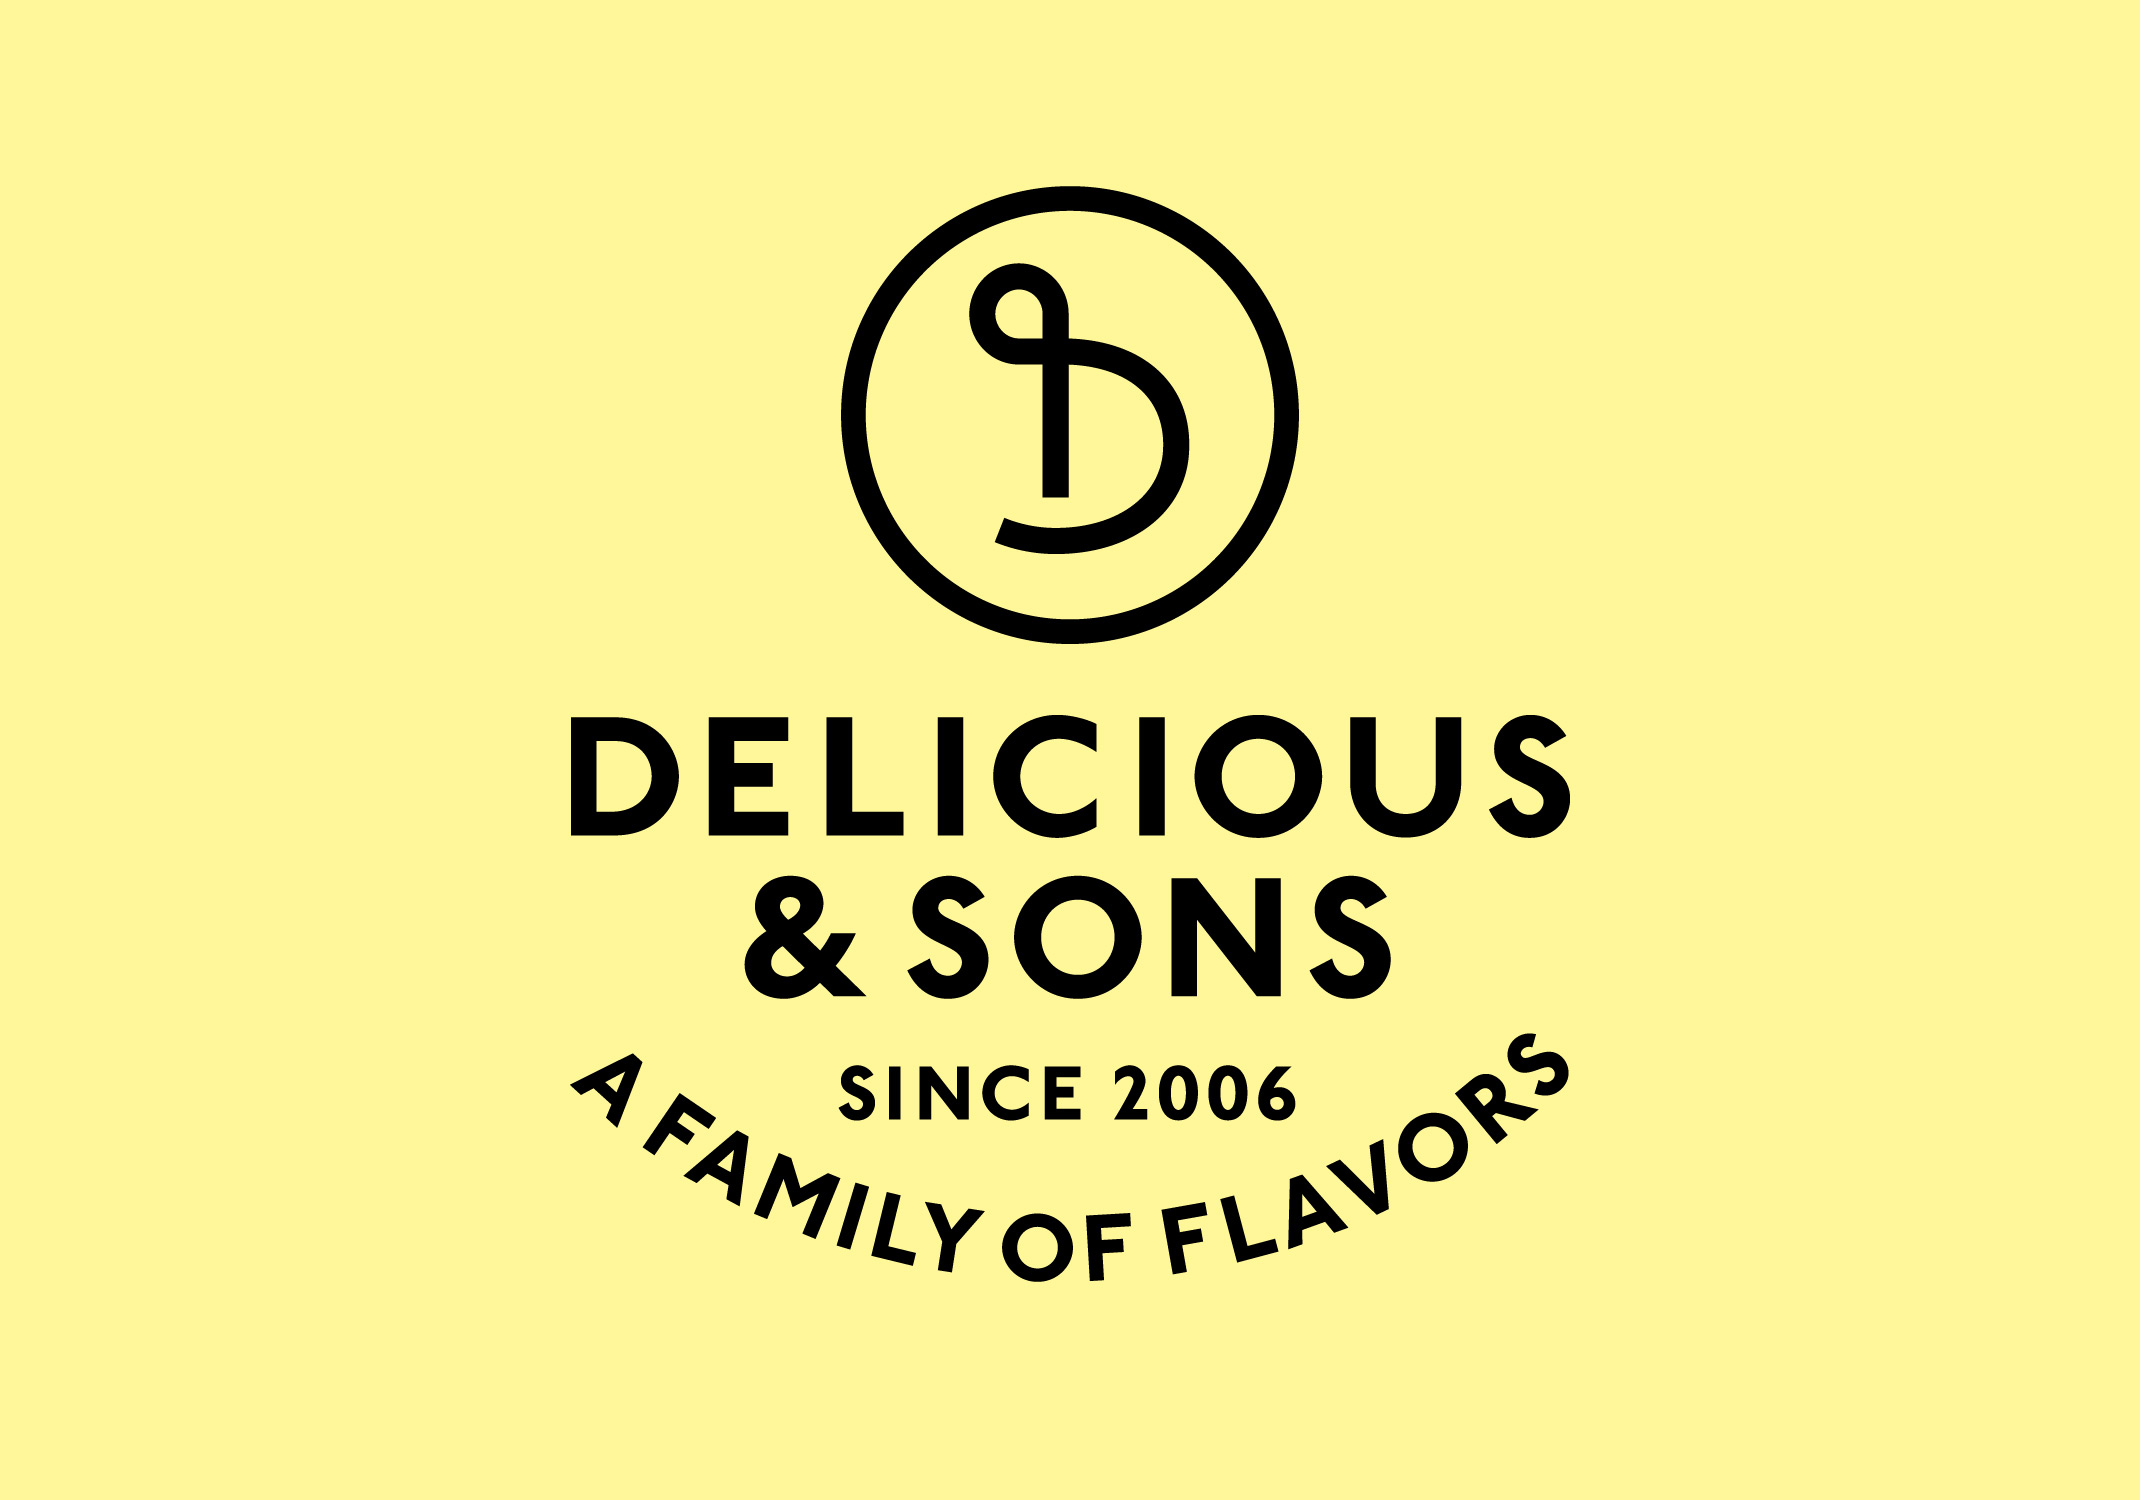 Delicious & Sons by Clase - Creative Work